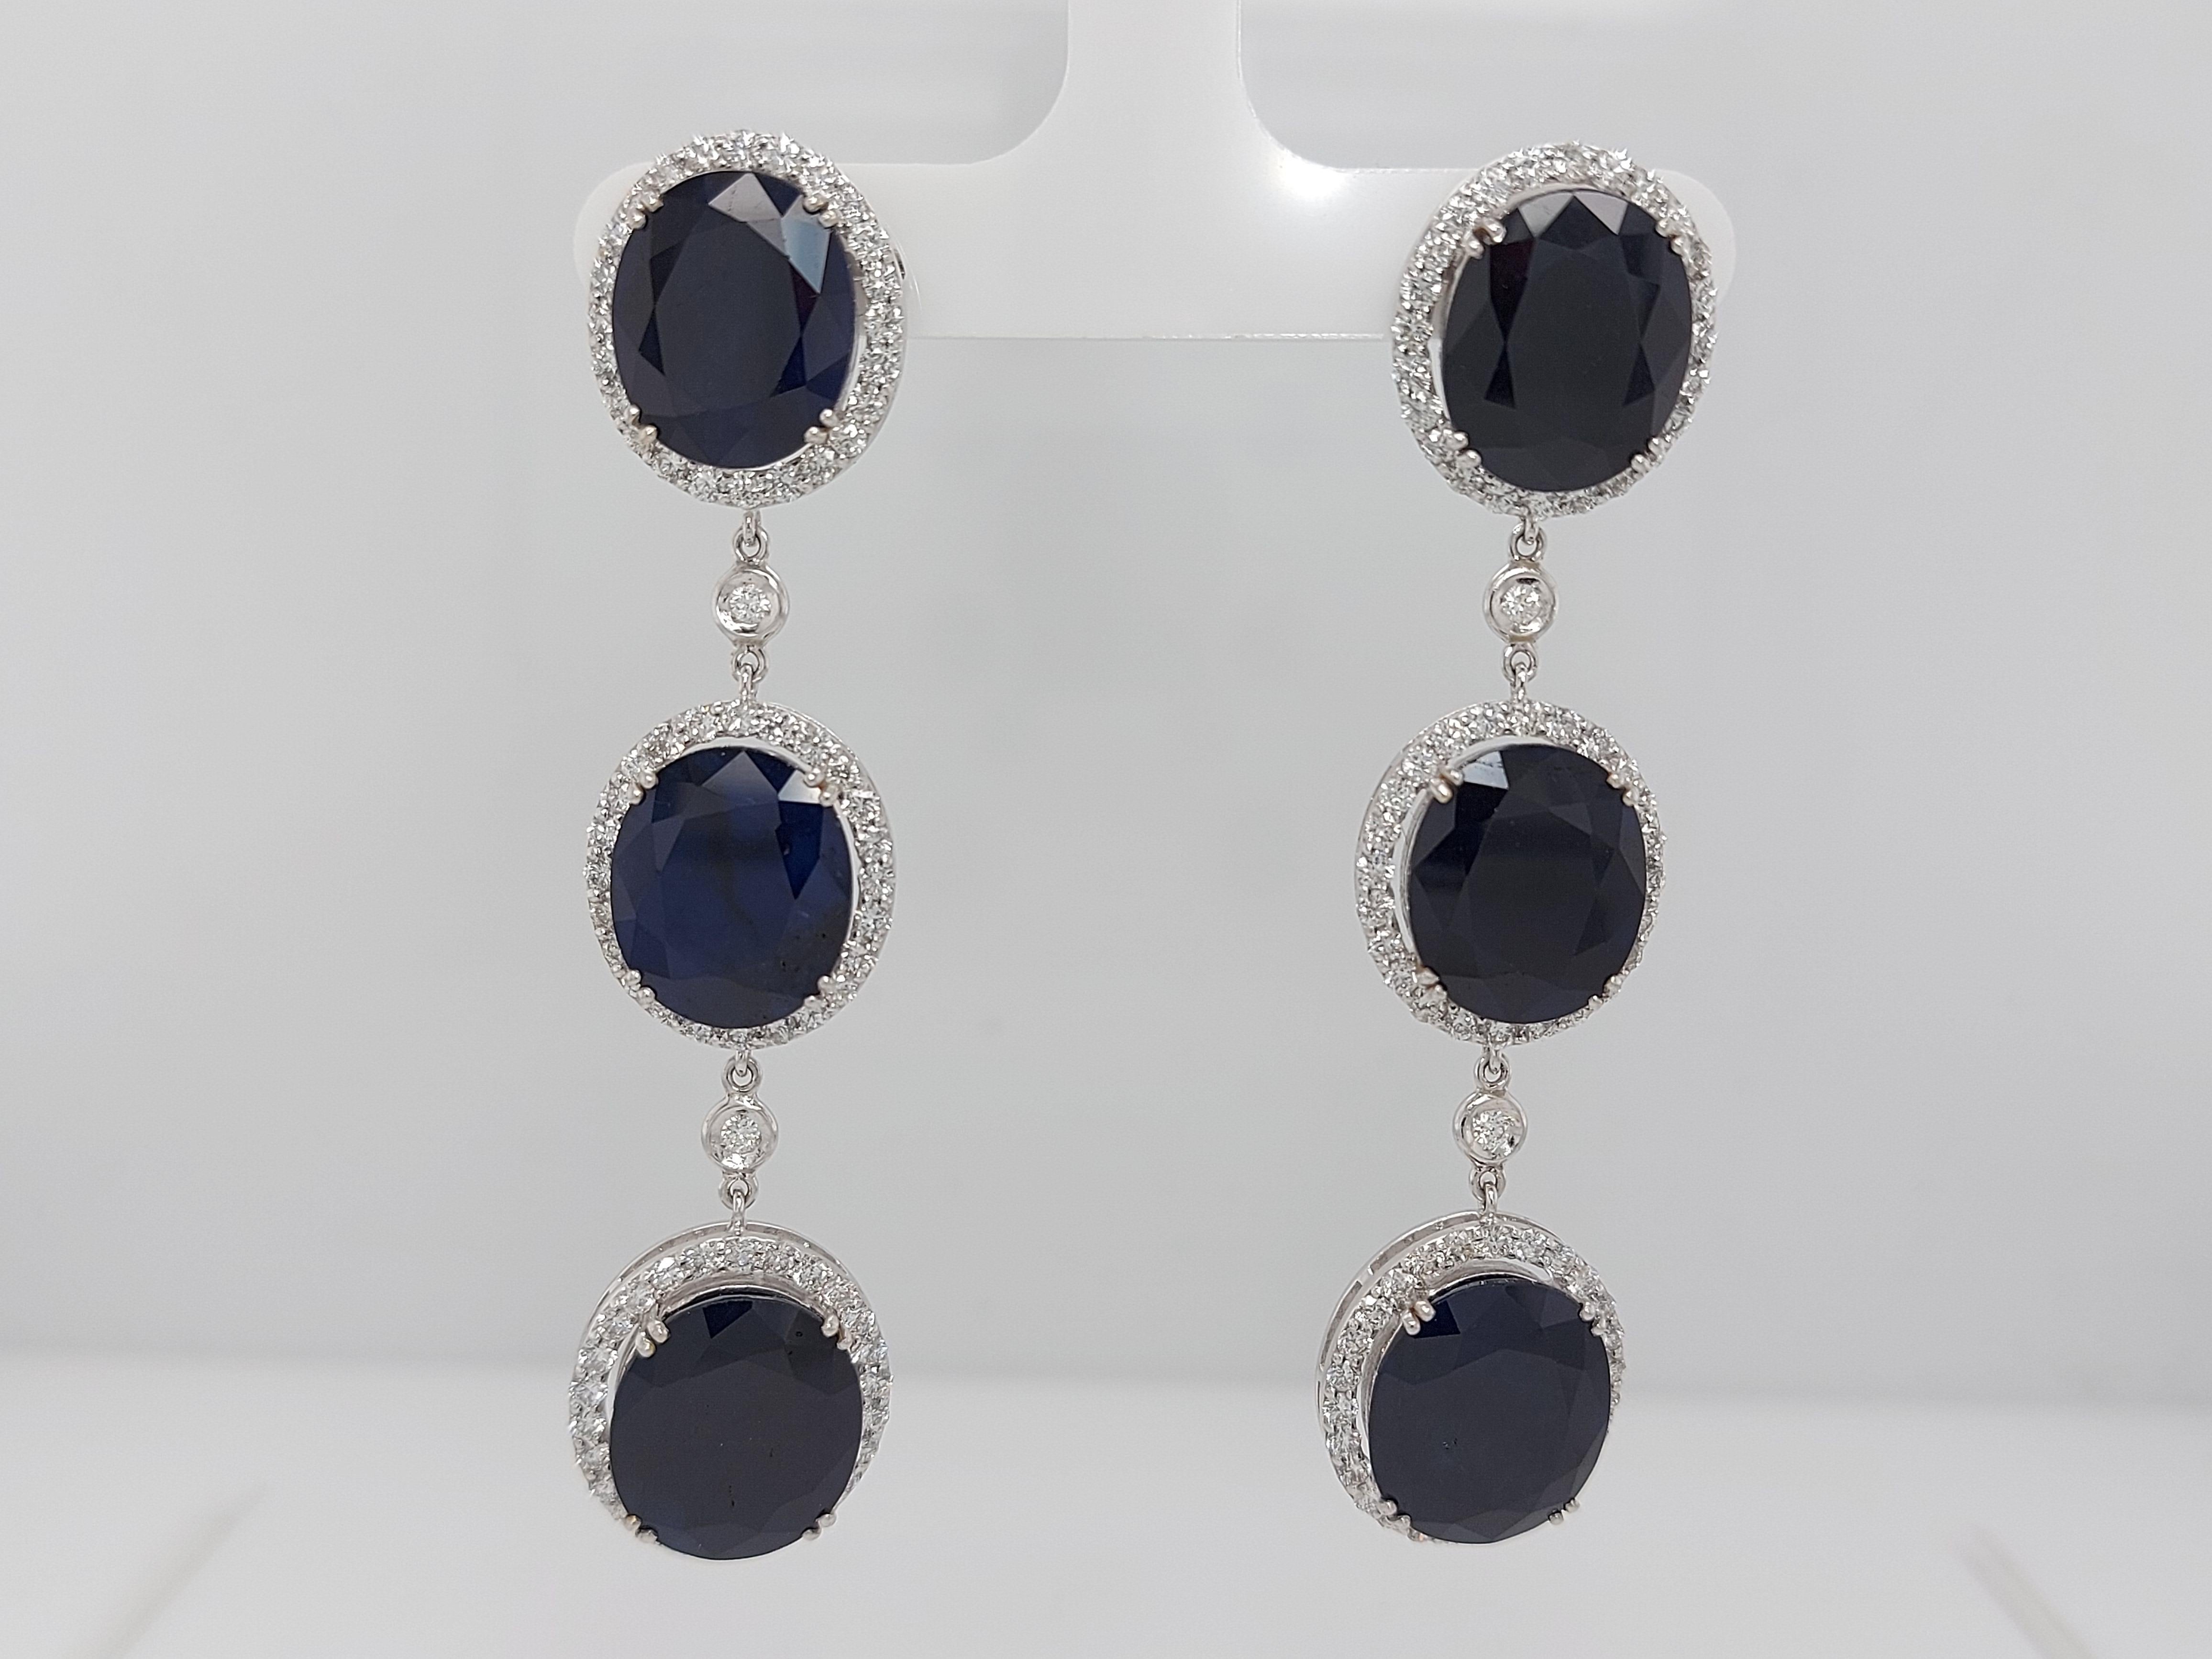 18kt White Gold Earrings 43.56ct Sapphire, 3.51ct Diamond For Sale 5